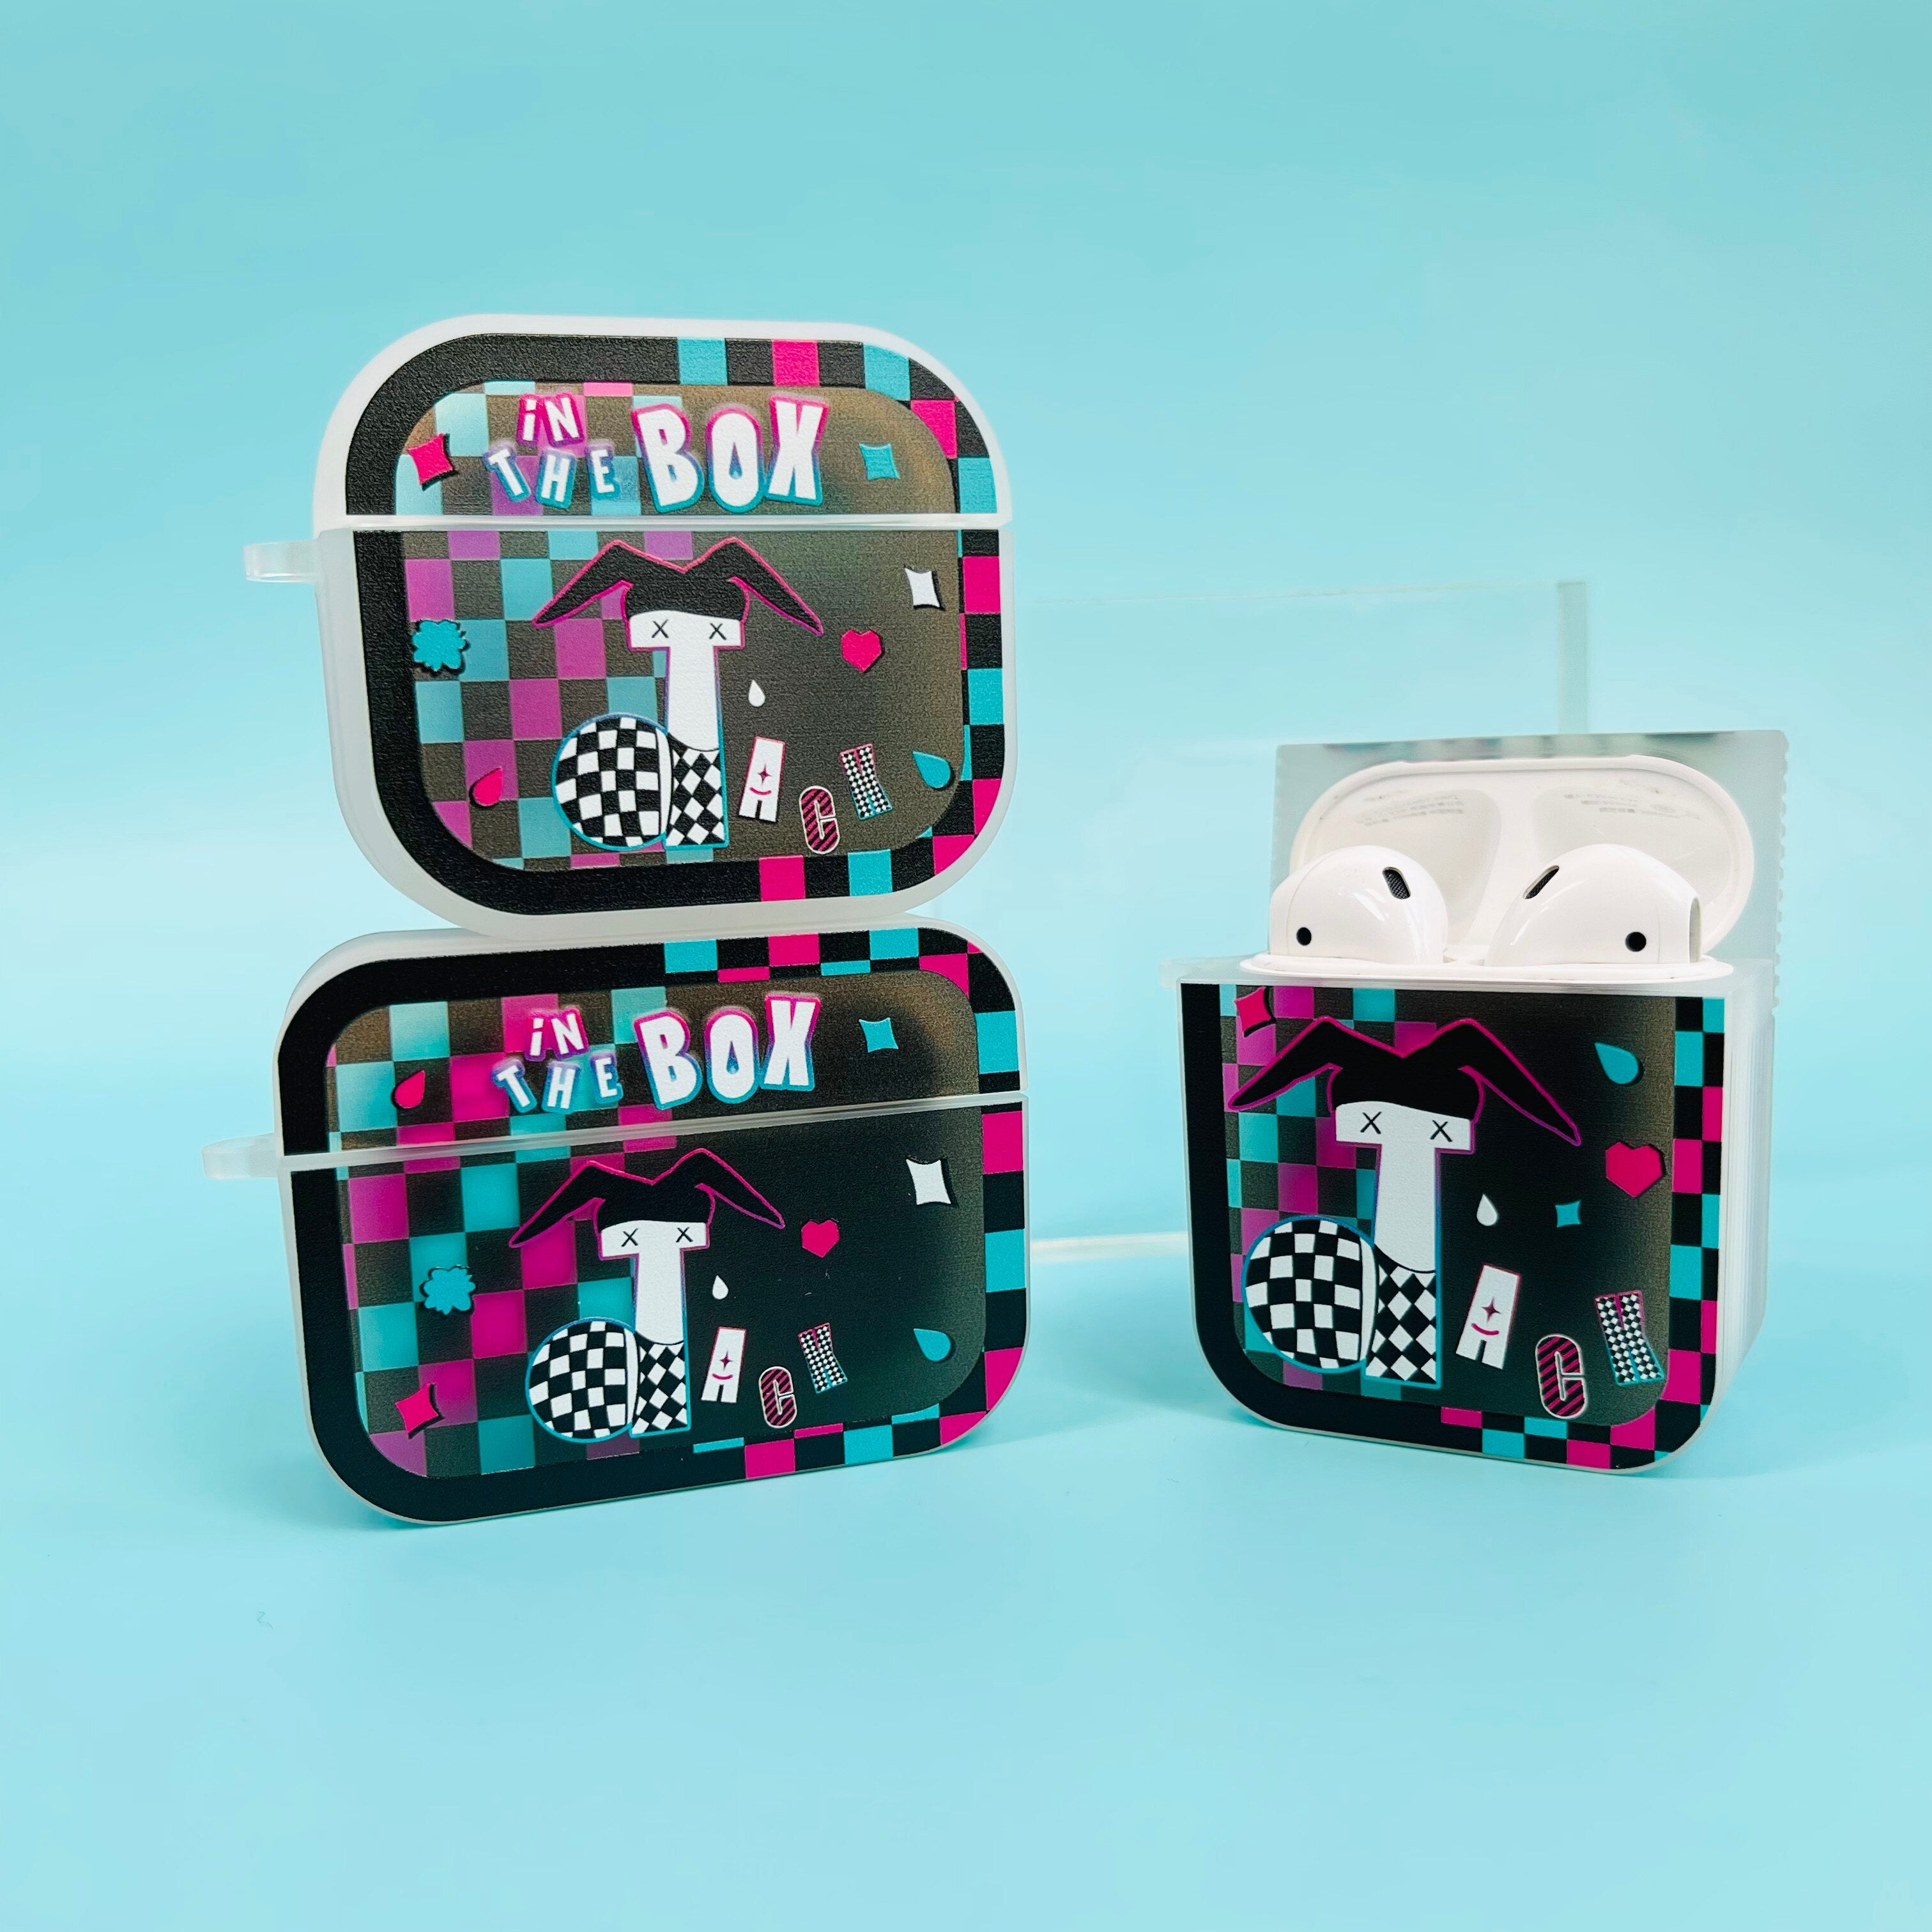 Jack in the box- Airpods Case